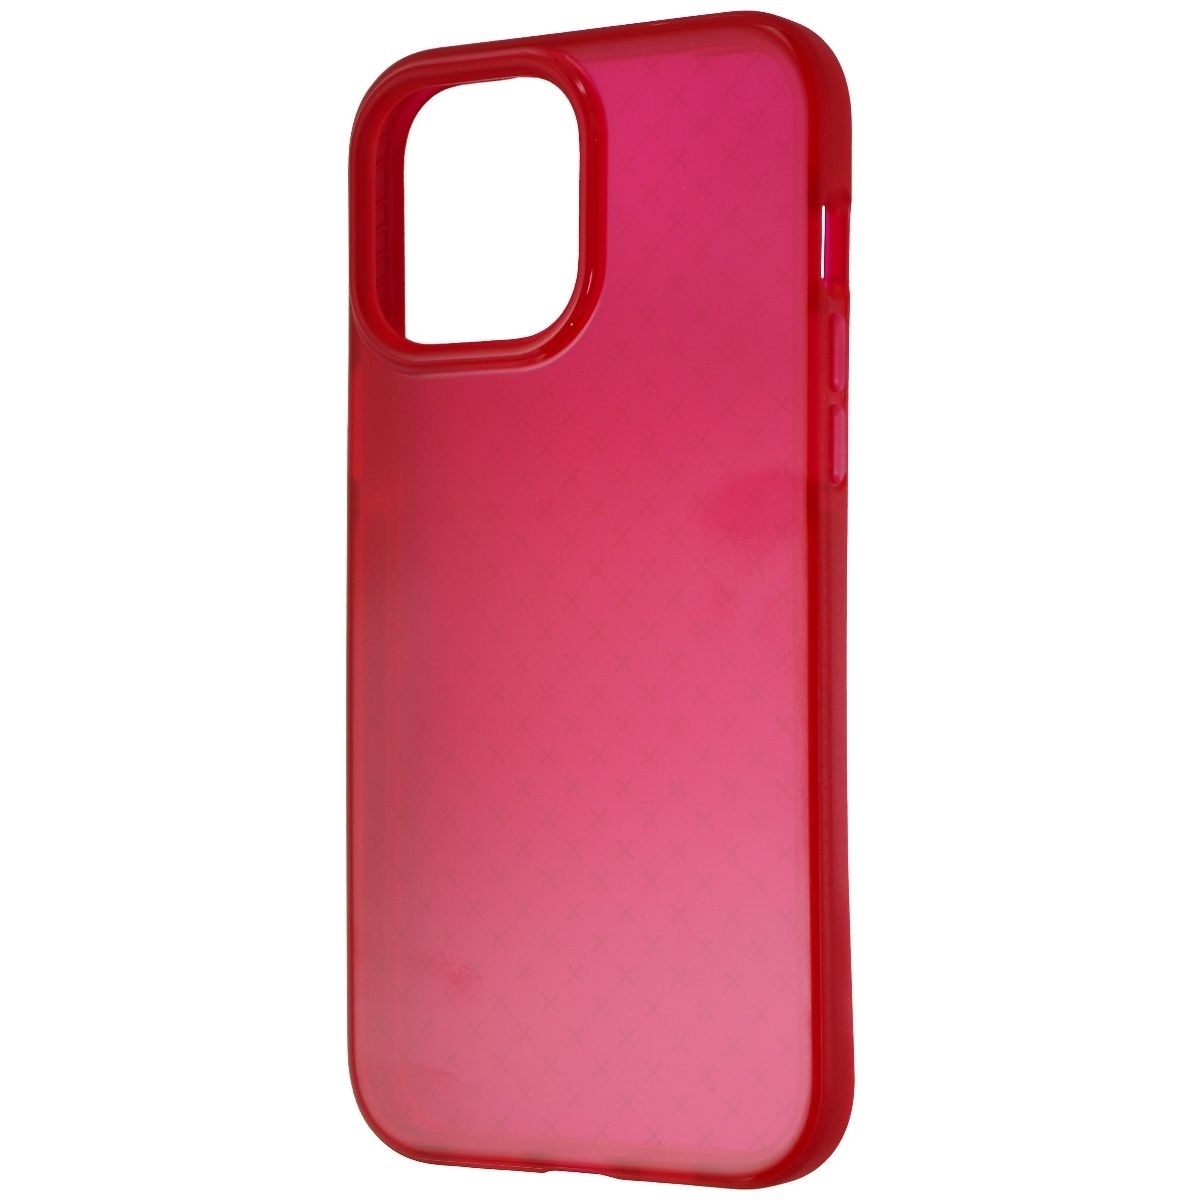 Tech21 Evo Check Flexible Gel Case For Apple IPhone 13 Pro Max - Rubine Red